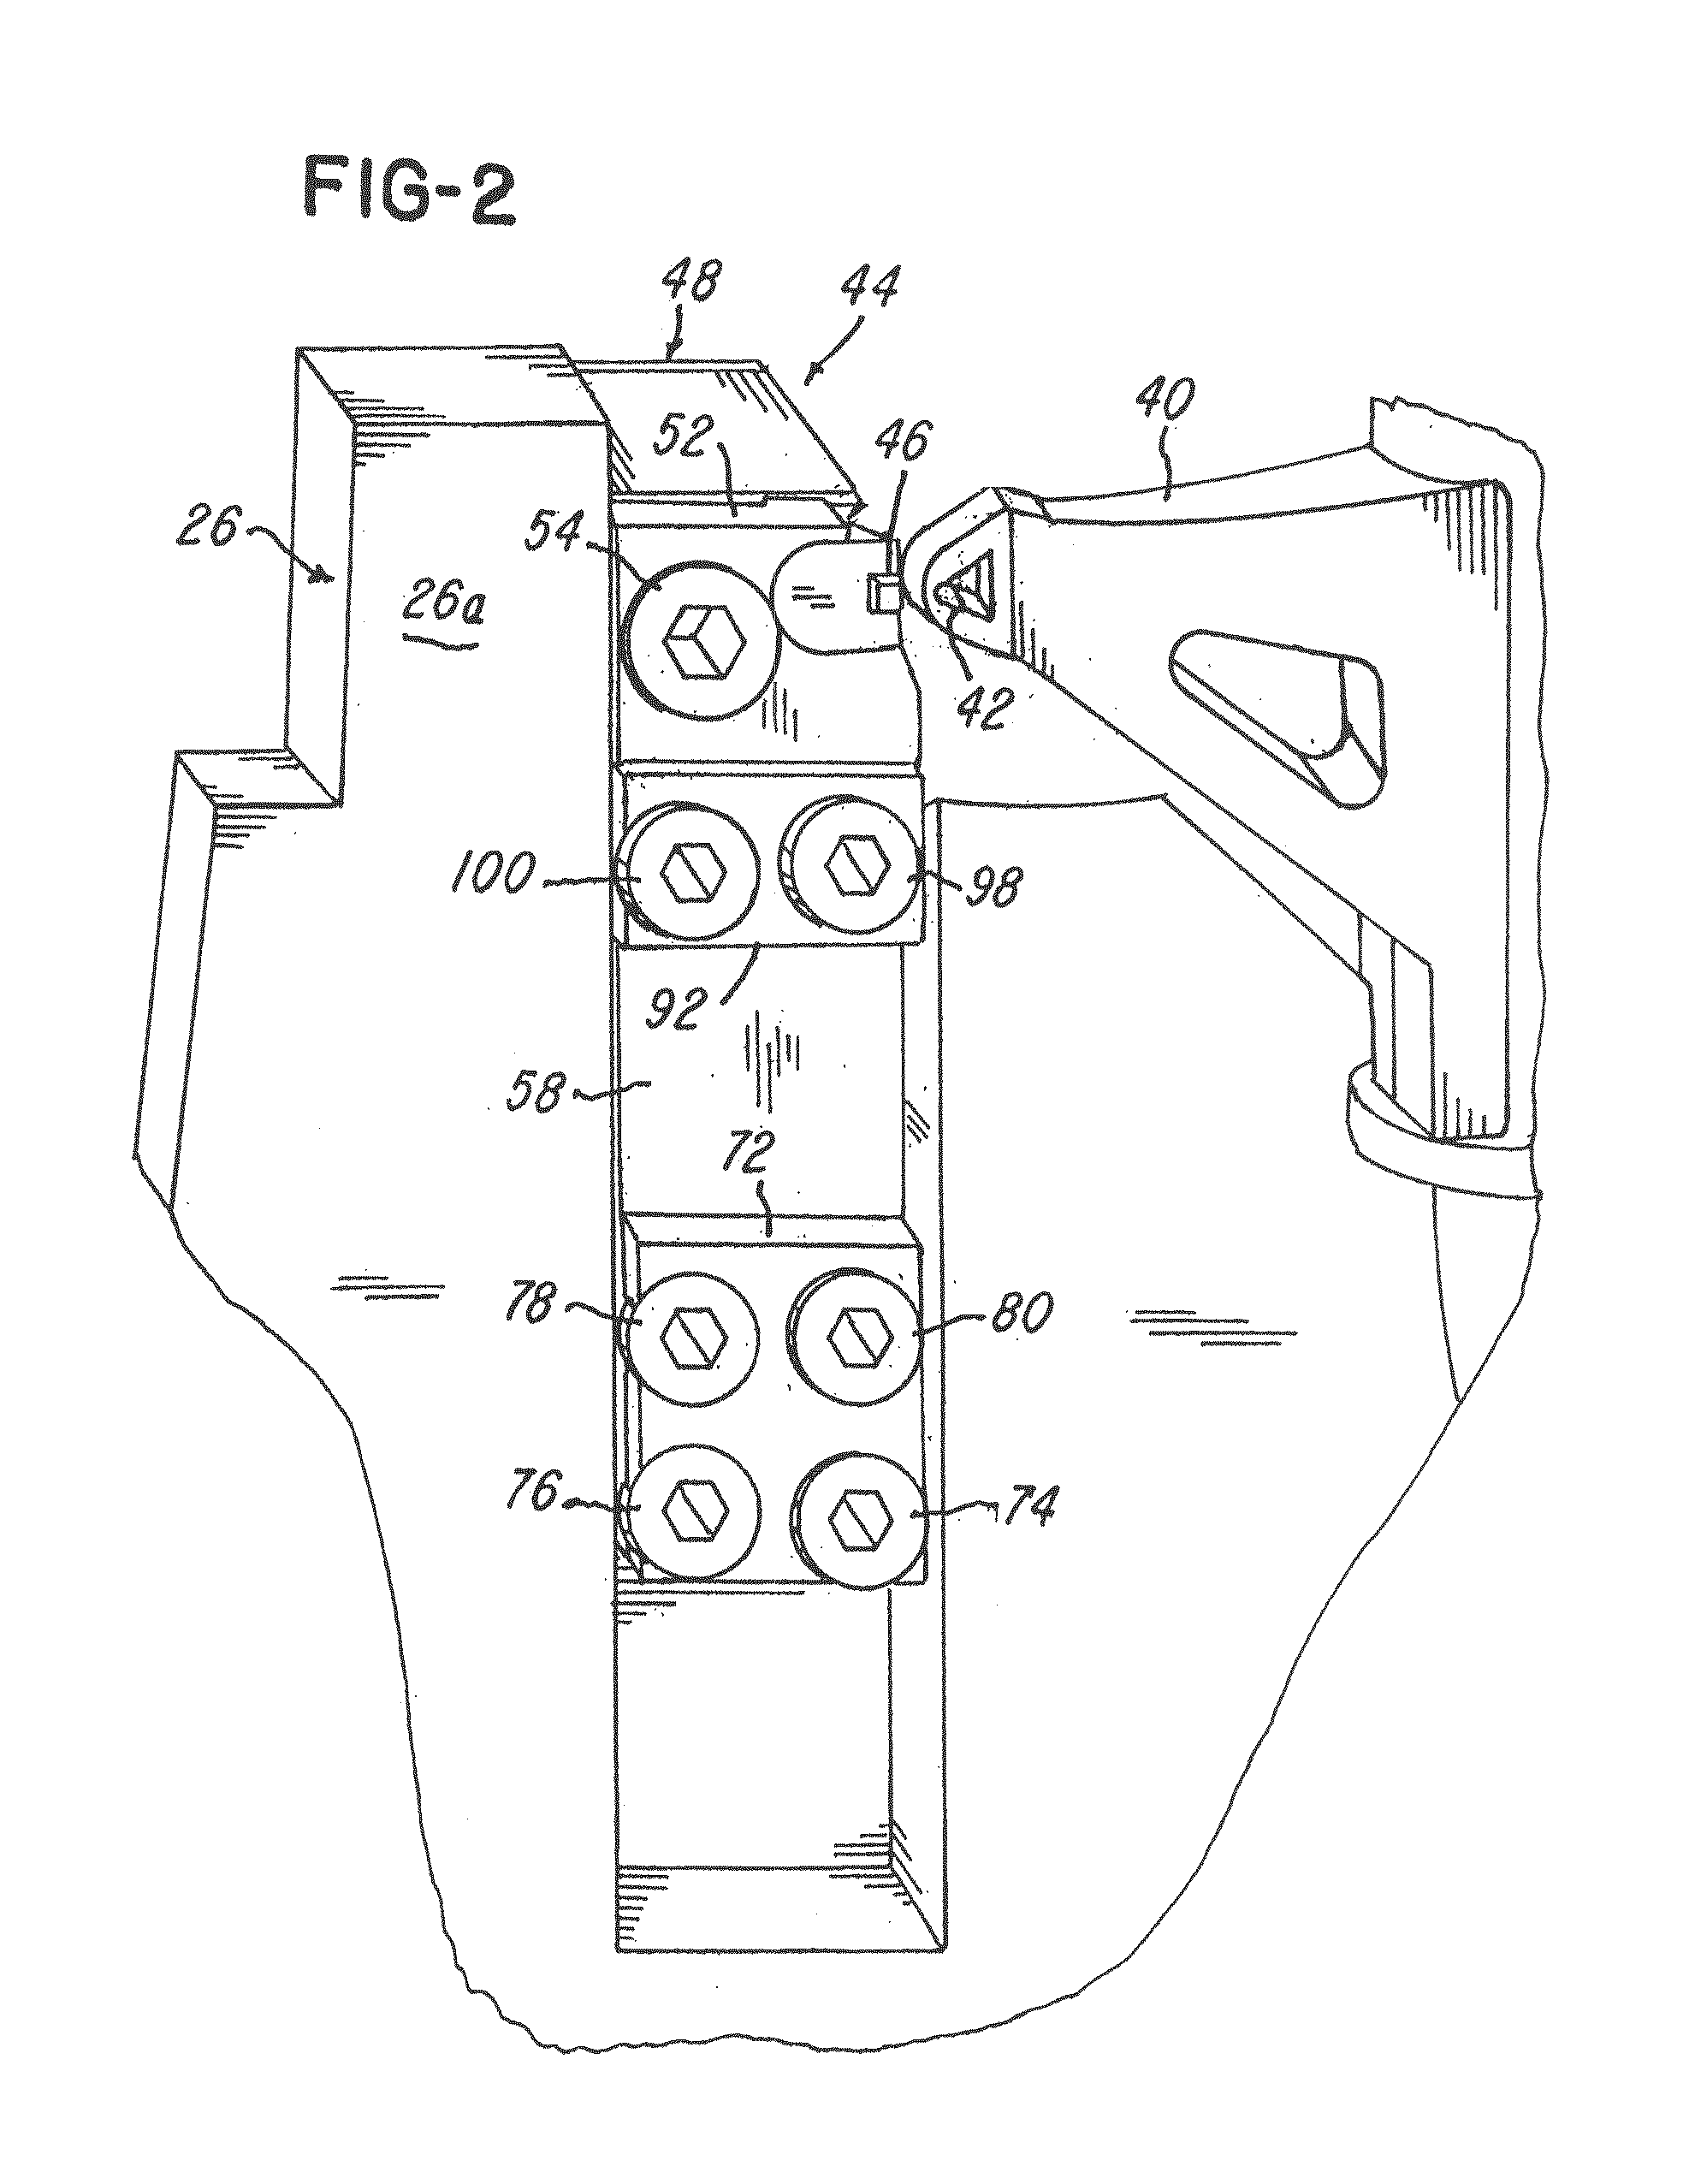 System and method for improved engraving of gravure cylinders by adjusting engraving signal responsive to movement of shoe position